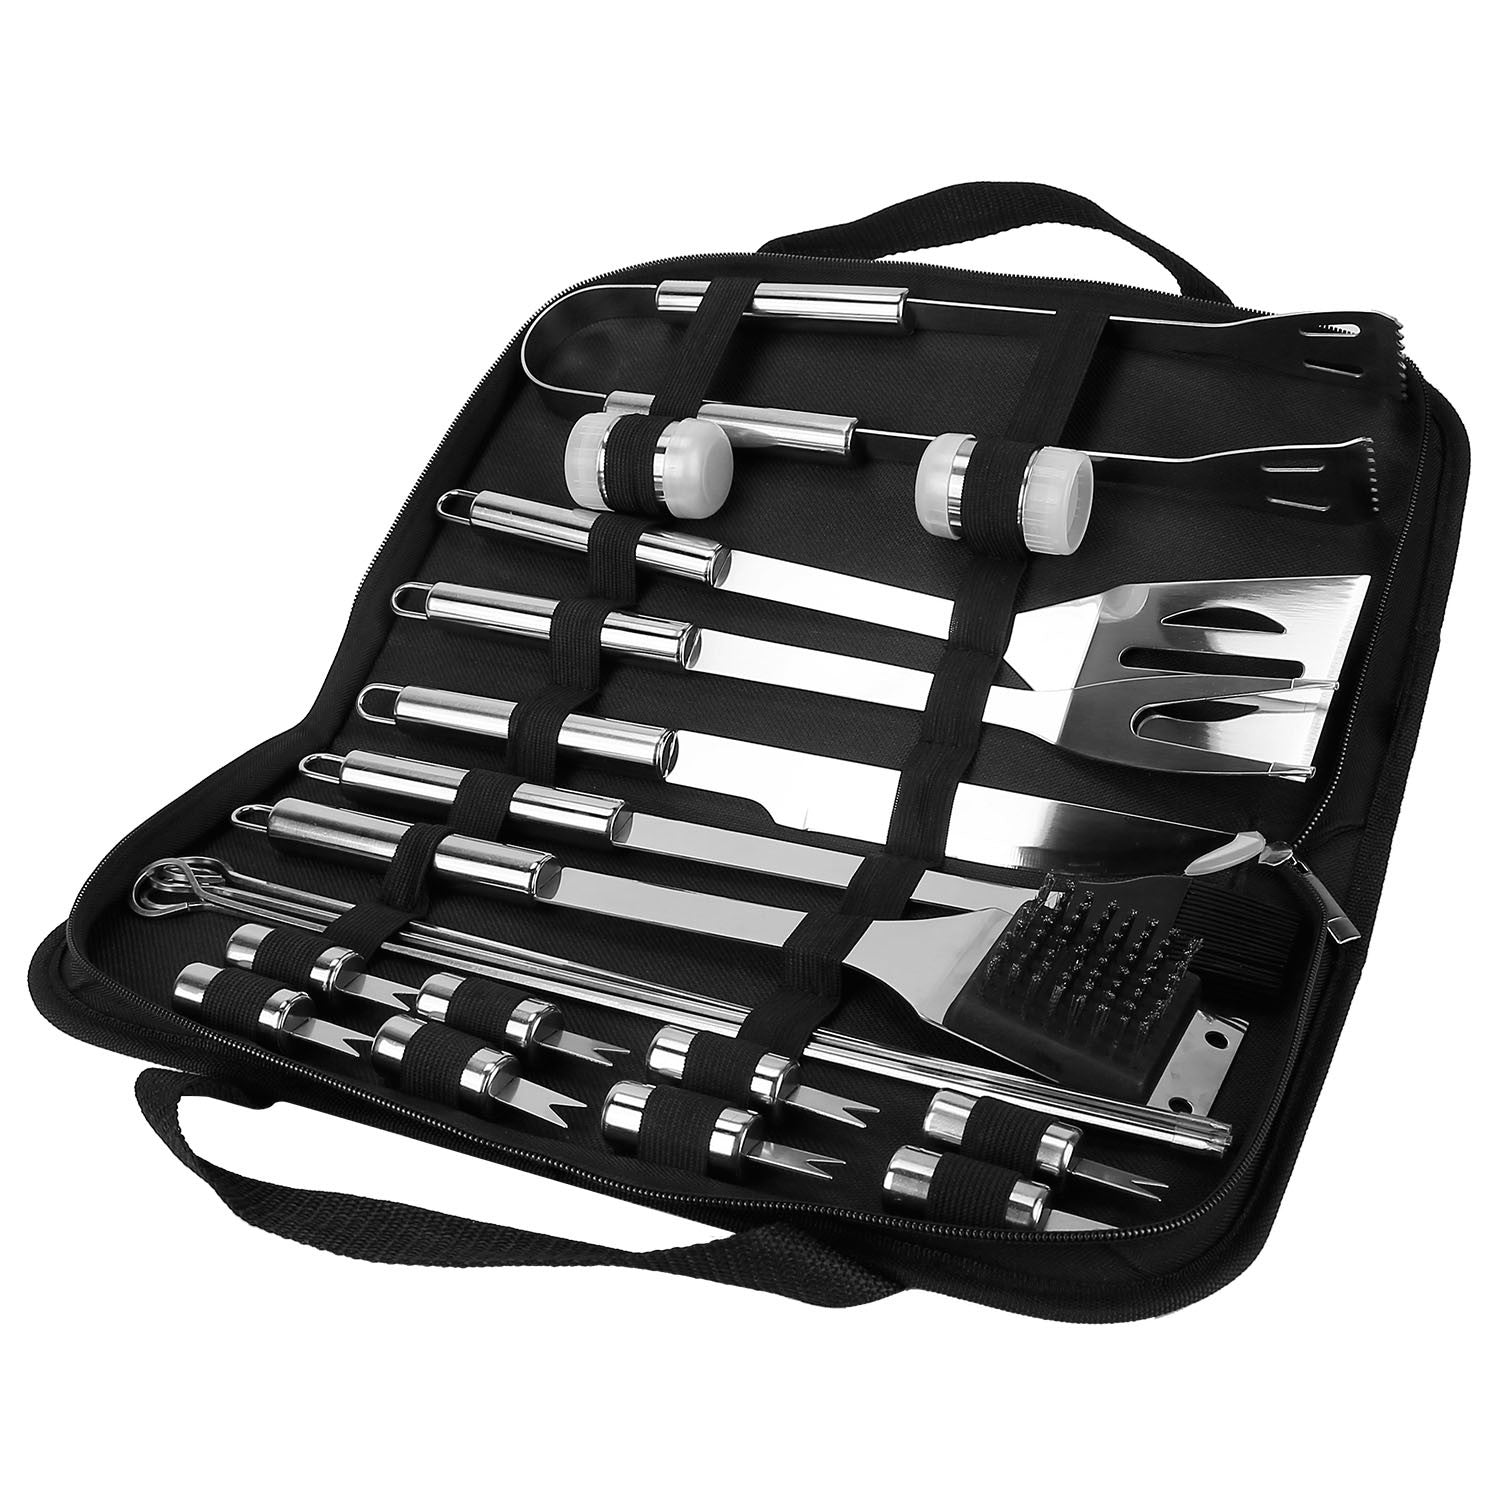 A set of Stainless Steel BBQ Grill Tool Kit Grilling Utensil Accessories with Spatula Tongs Fork Knife Brush Pepper Salt Shaker Bottle Grilled Skewers Corn Needles in a black case.